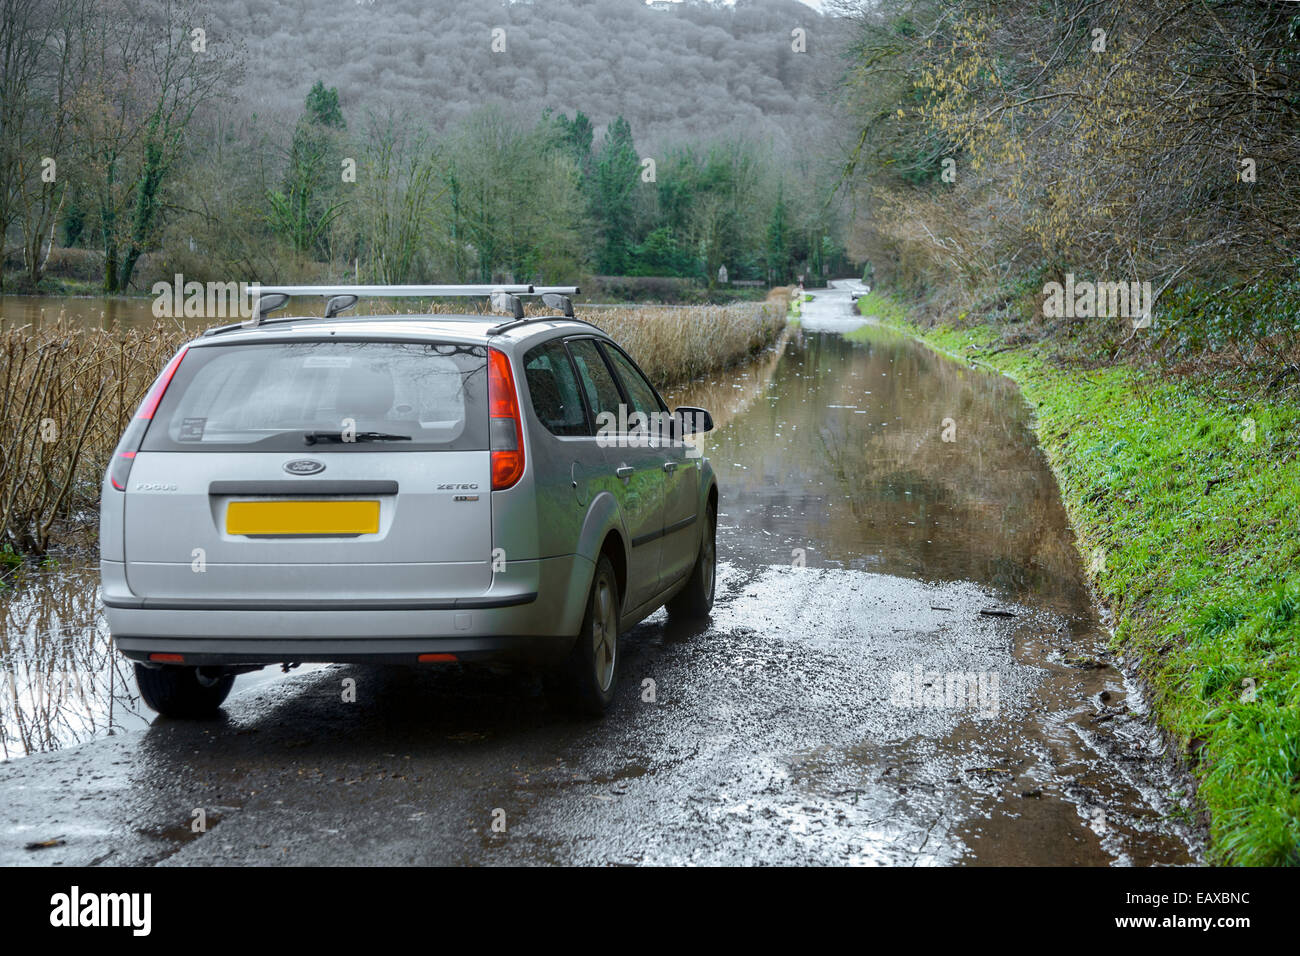 Car stopped on a flooded country road. Stock Photo